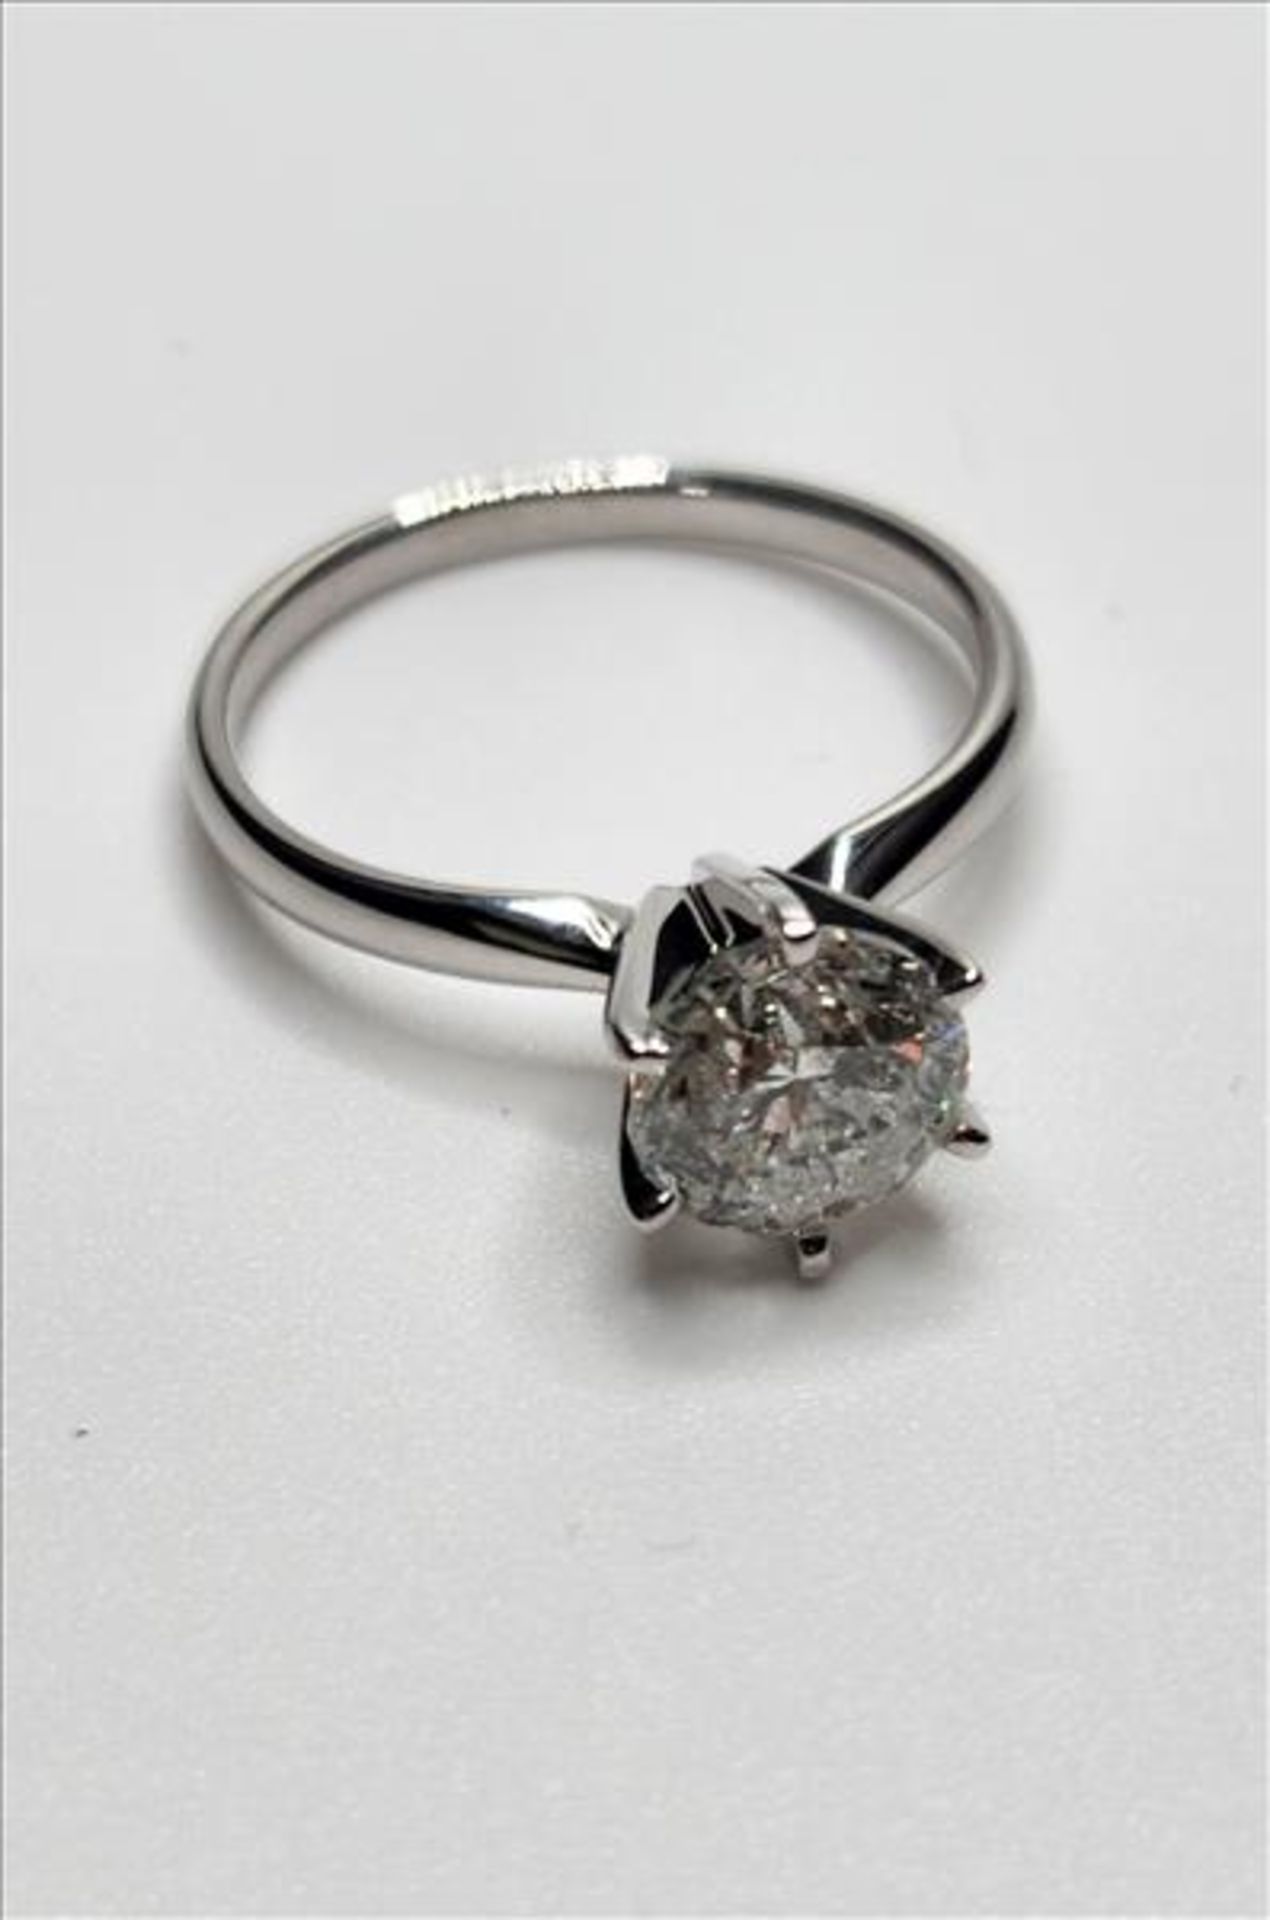 One lady’s stamped and tested 14kt white gold diamond solitaire engagement ring trademarked by Charm - Image 3 of 7